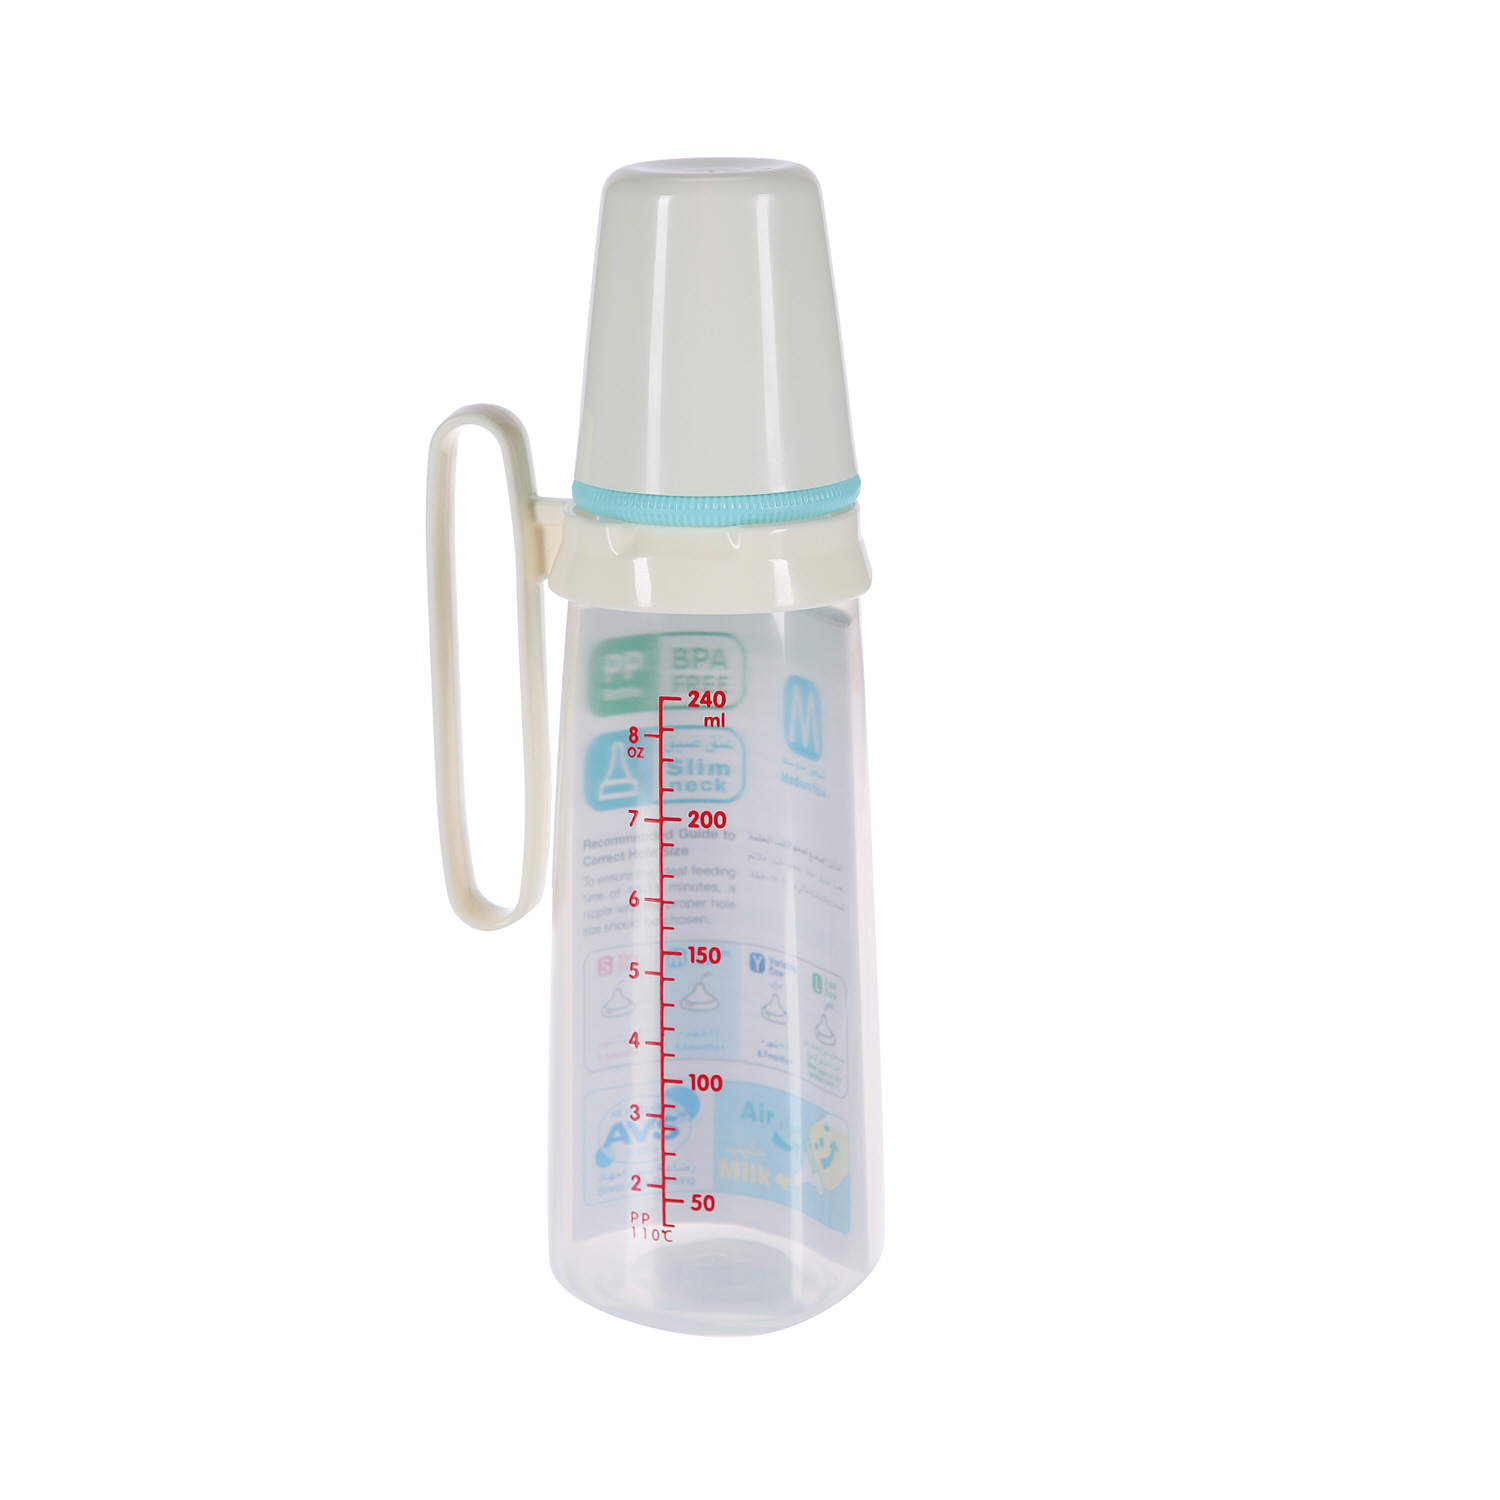 Pigeon Feeding Bottle With Handle 26008 Clear 240 ml